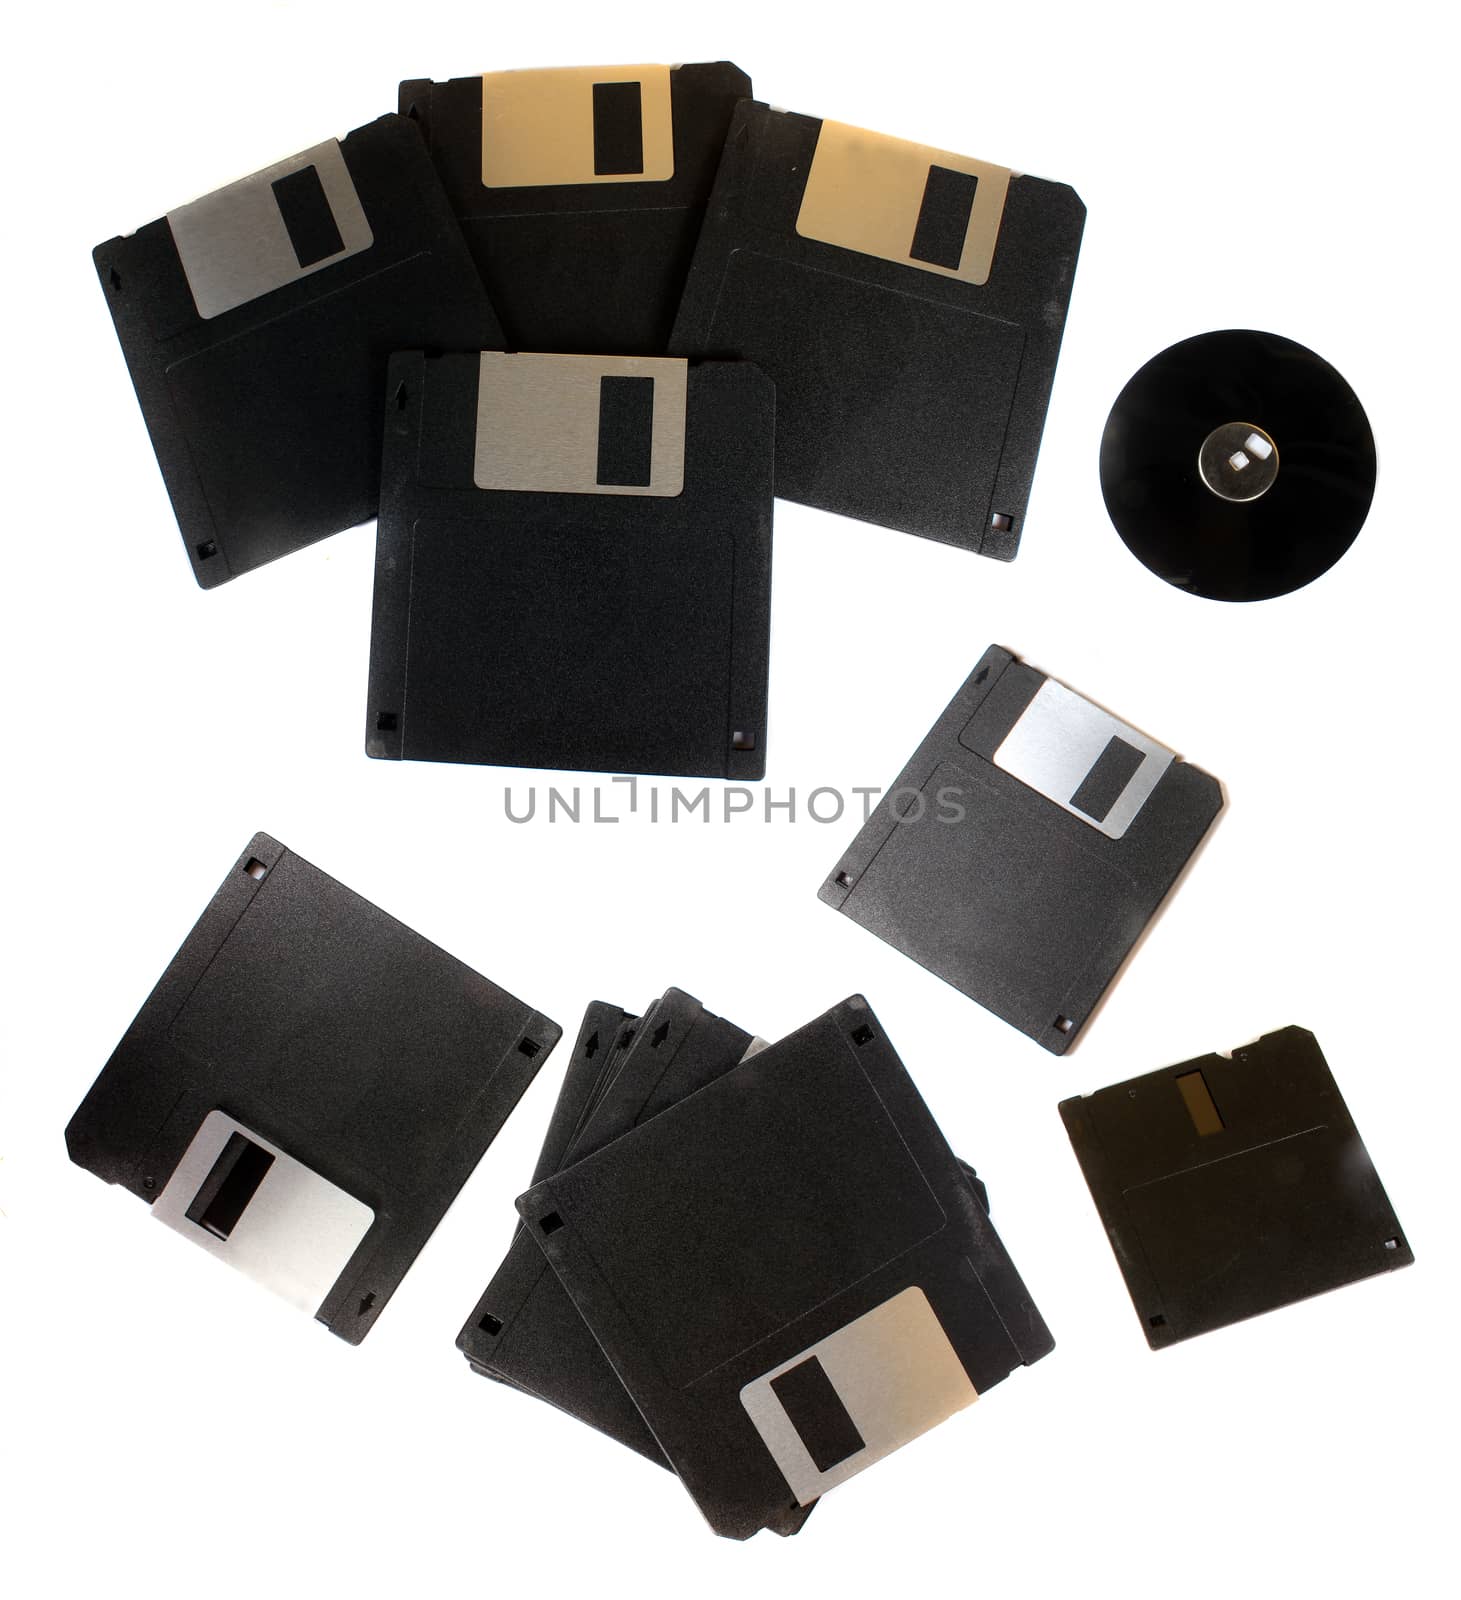 Old floppys used for computer storage in 80s and 90s, on white studio background